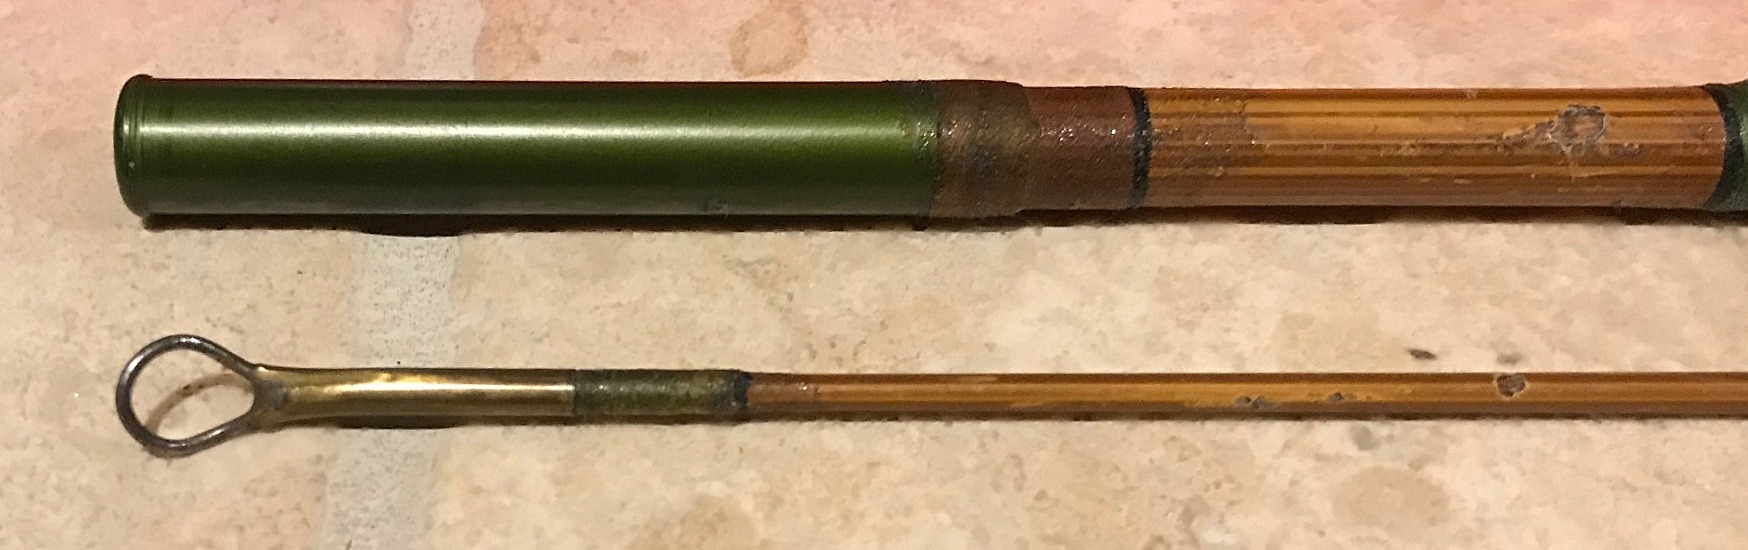 VINTAGE ORCHARD INDUSTRIES MODEL 1970 FISHING ROD ACTION ROD 7' W/CASE AND  TUBE 